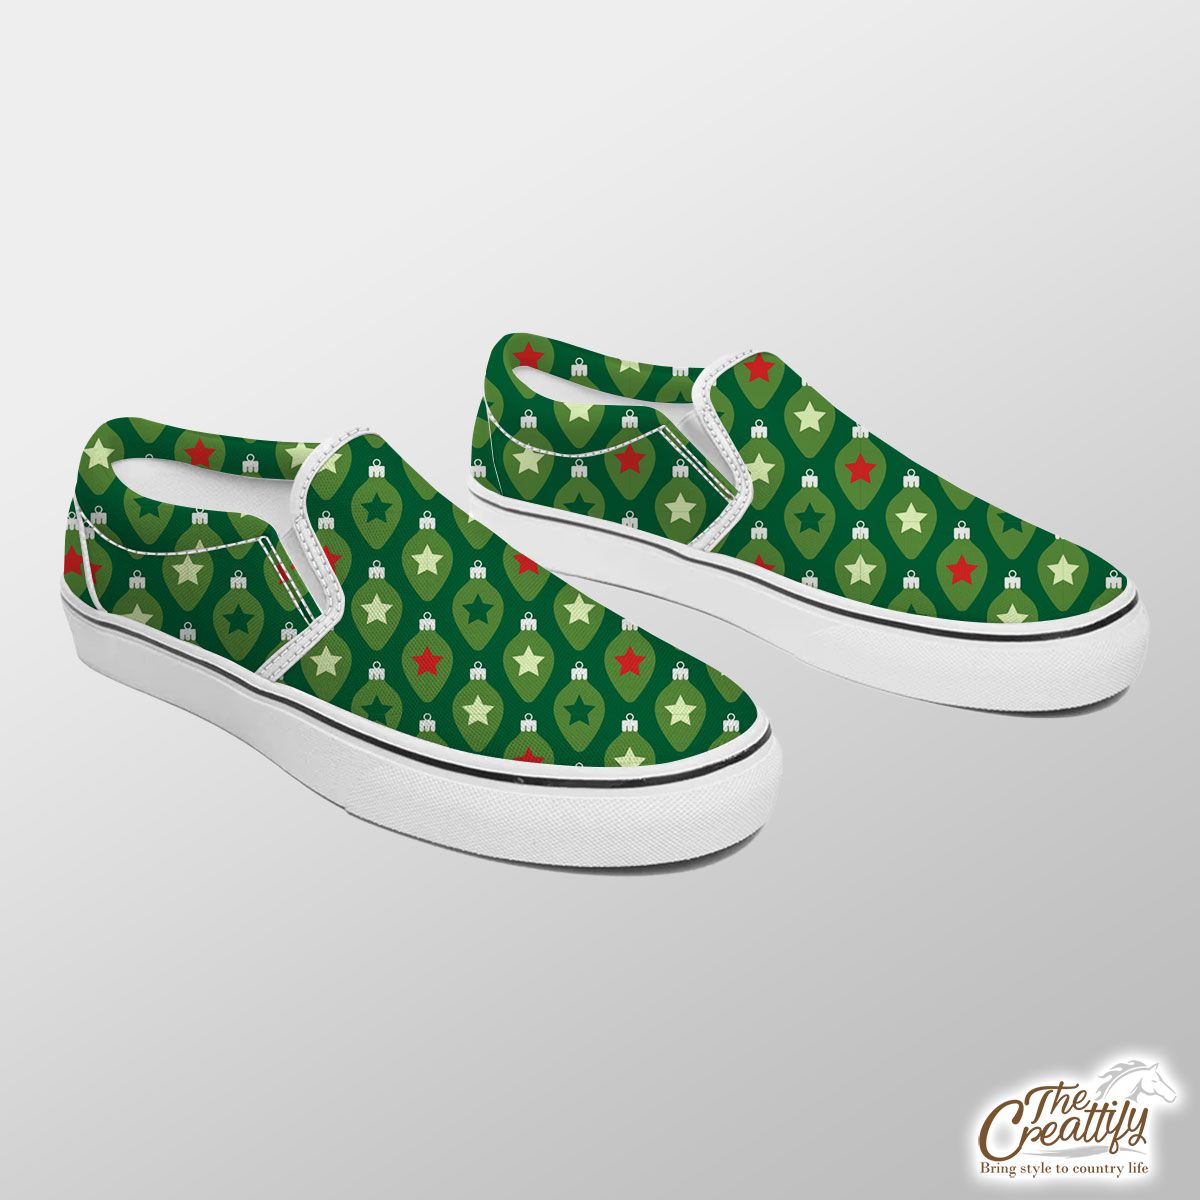 Green Christmas Lights And Colorful Stars Slip On Sneakers